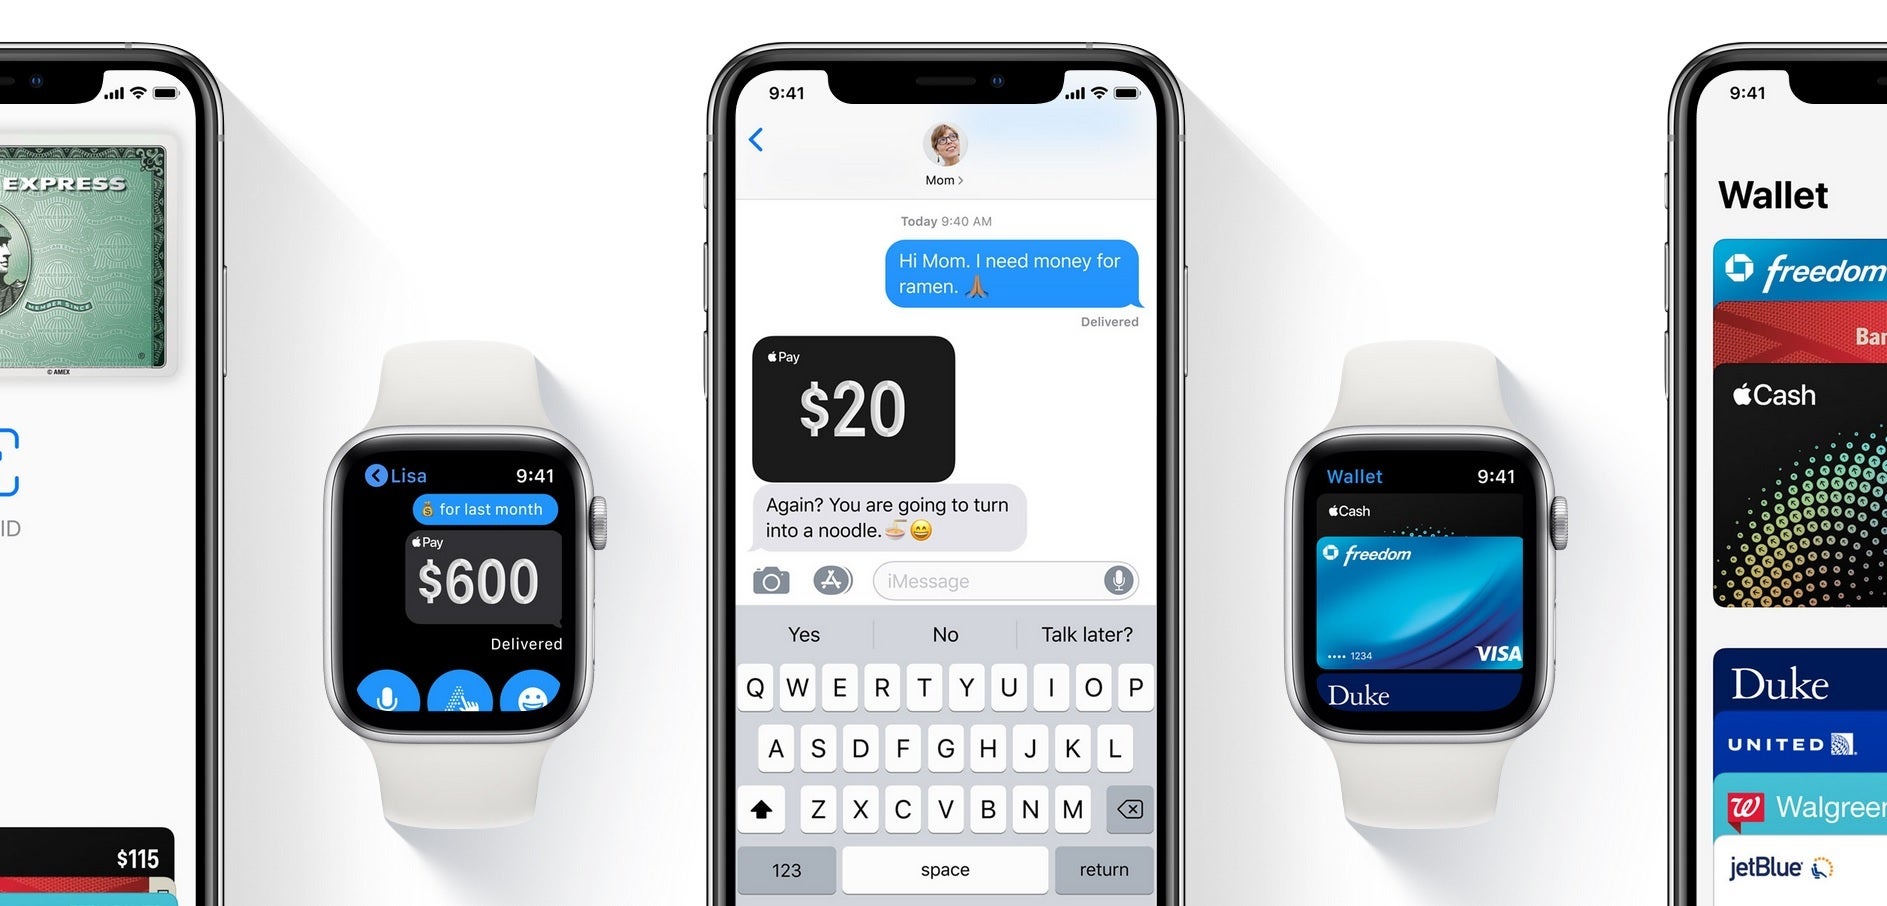 During the quarter, the number of monthly transactions handled by Apple Pay nearly doubled from a year ago - Don't look back PayPal; Apple Pay is gaining on you